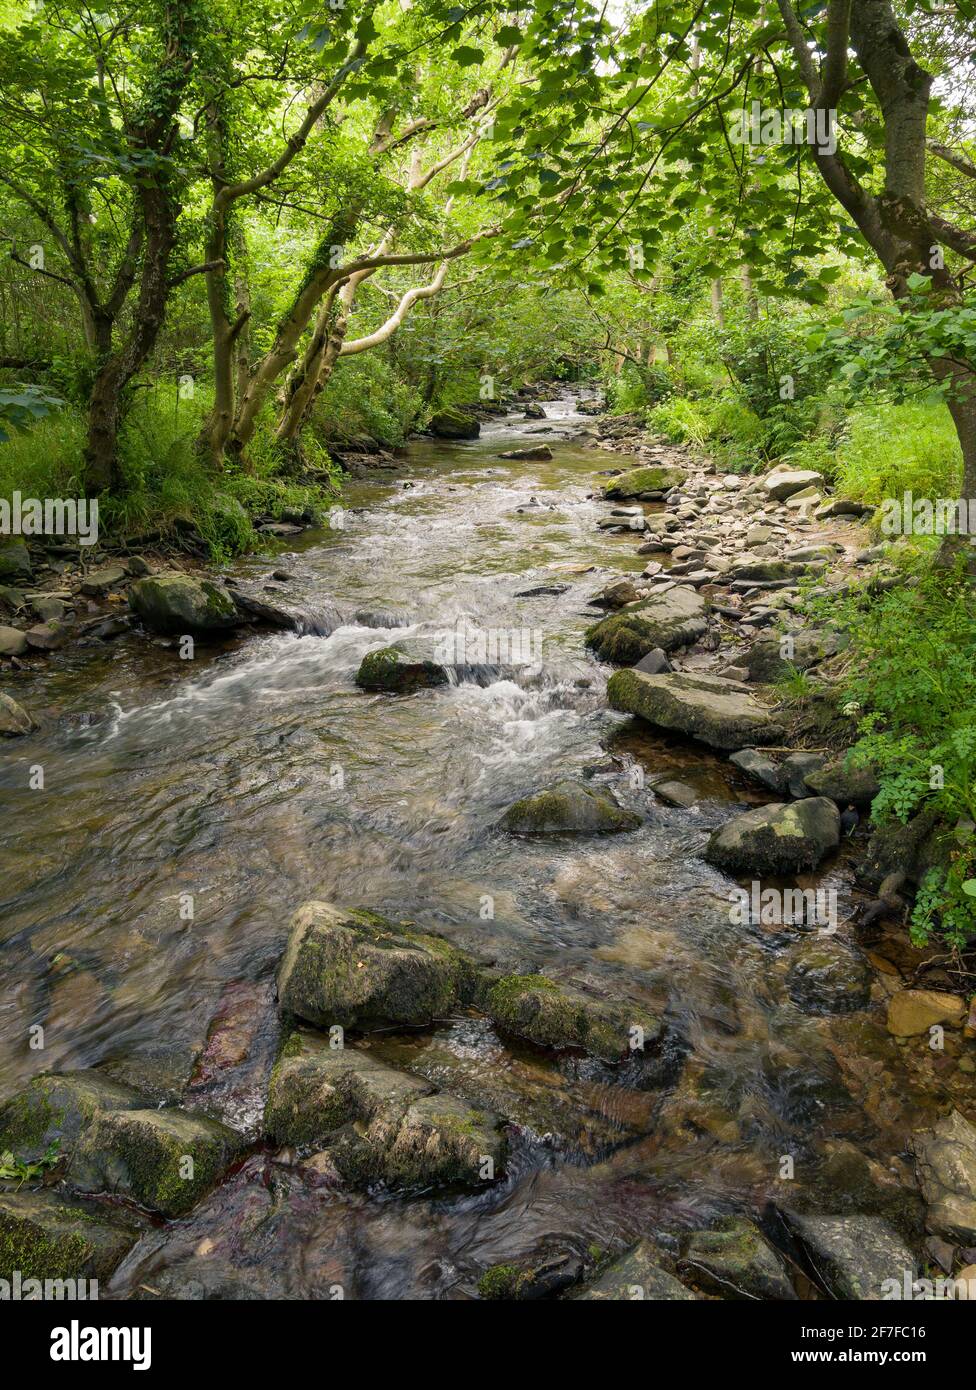 The River Heddon in the Heddon Valley near Trentishoe in the Exmoor National Park, North Devon, England. Stock Photo